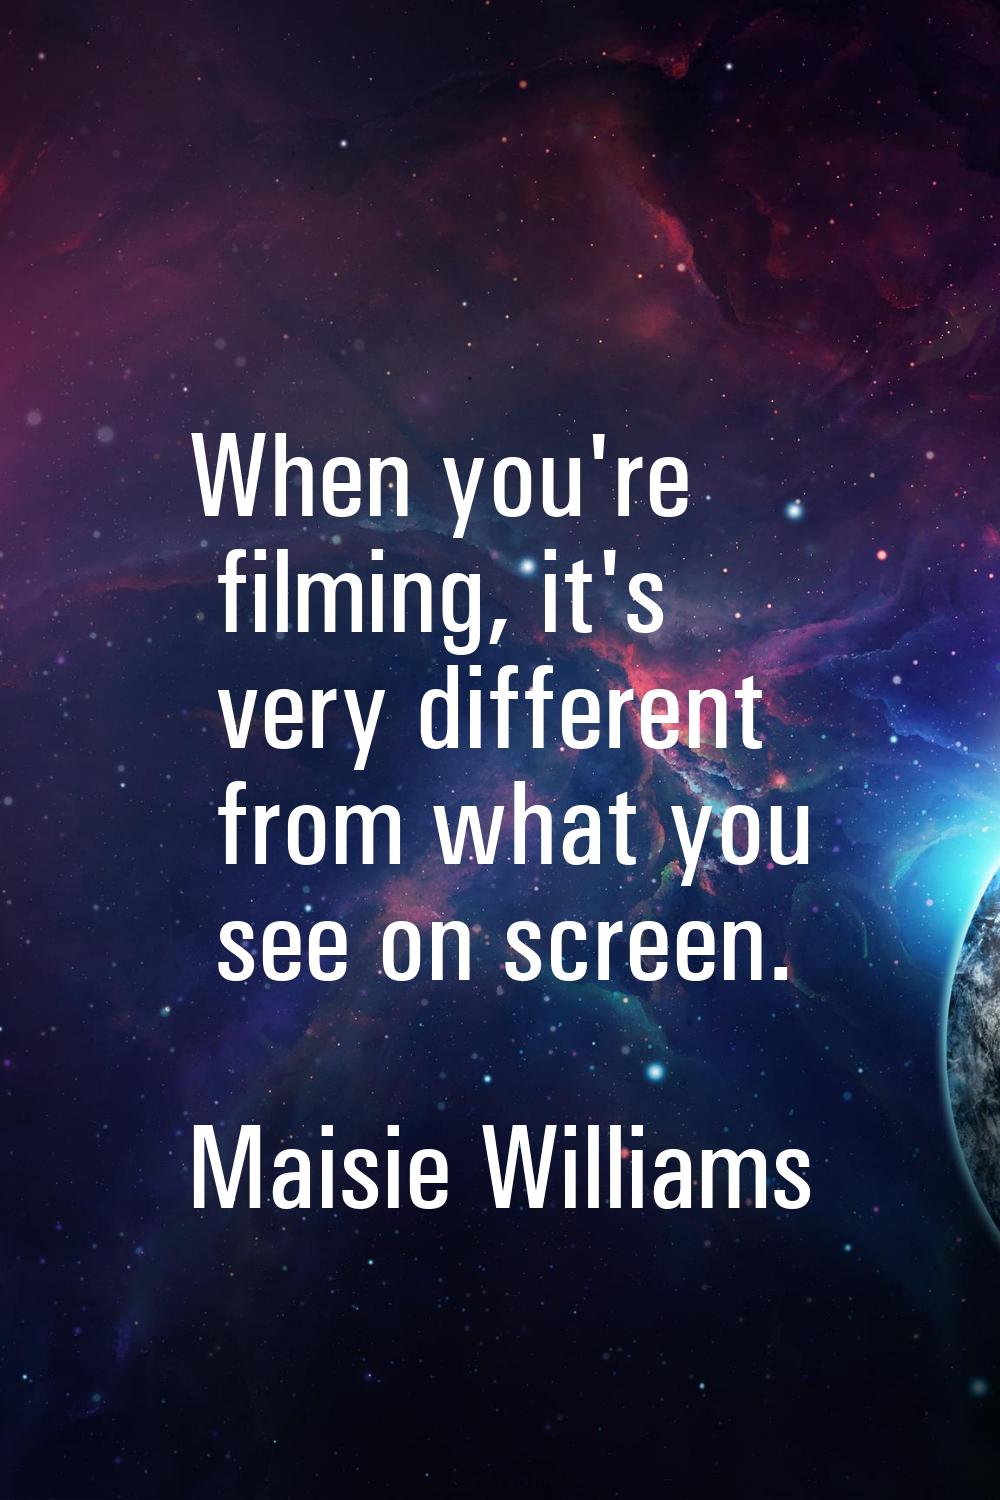 When you're filming, it's very different from what you see on screen.